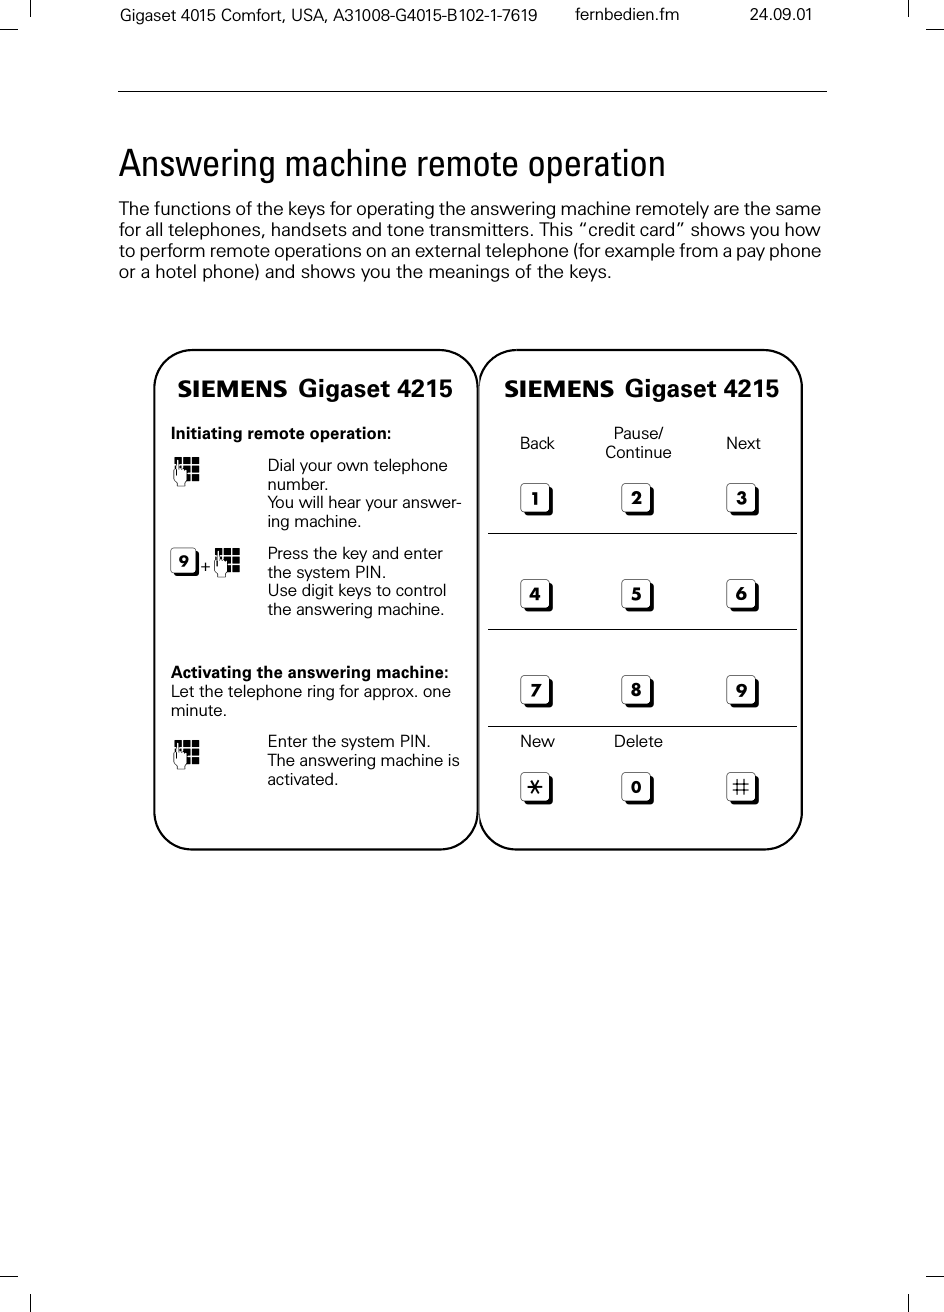 Gigaset 4015 Comfort, USA, A31008-G4015-B102-1-7619 fernbedien.fm 24.09.01Answering machine remote operationThe functions of the keys for operating the answering machine remotely are the same for all telephones, handsets and tone transmitters. This “credit card” shows you how to perform remote operations on an external telephone (for example from a pay phone or a hotel phone) and shows you the meanings of the keys.s Gigaset 4215Initiating remote operation:)Dial your own telephone number.You will hear your answer-ing machine.+)Press the key and enter the system PIN.Use digit keys to control the answering machine.Activating the answering machine:Let the telephone ring for approx. one minute.)Enter the system PIN. The answering machine is activated.s Gigaset 4215Back Pause/Continue NextNew Delete